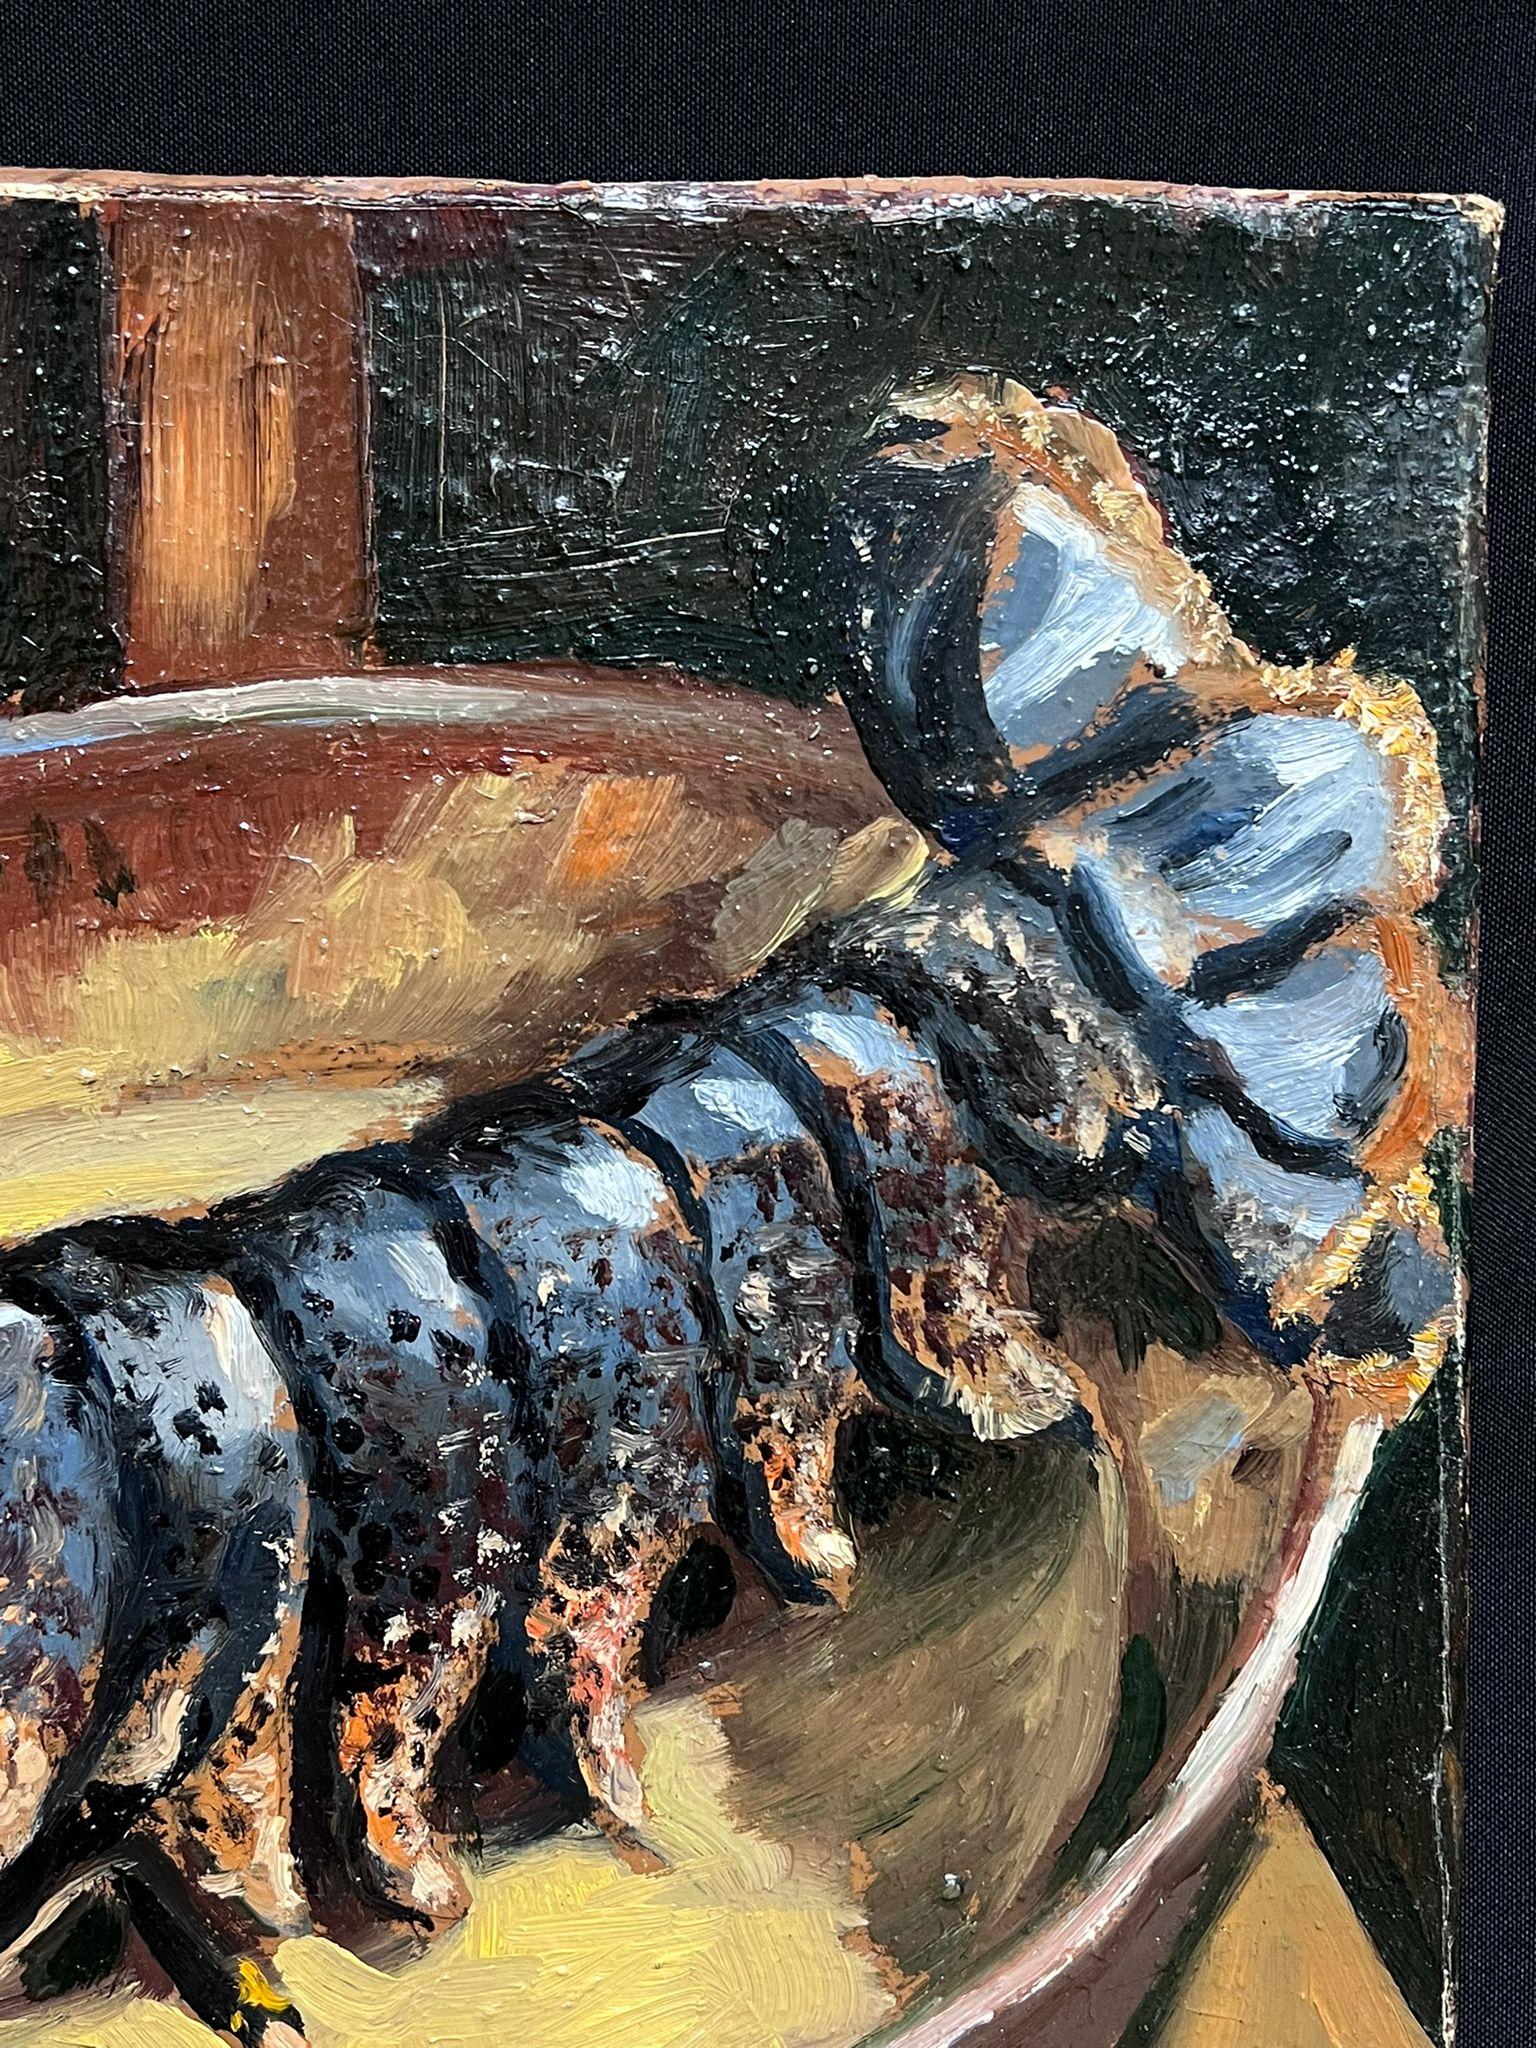 Lobster
by Georges Bordonave (French contemporary)  
signed oil painting on canvas, unframed
dated 1978
canvas: 15.5 x 18.5 inches
condition: very good
provenance: from a large private collection of this artists work, western Paris, France. 